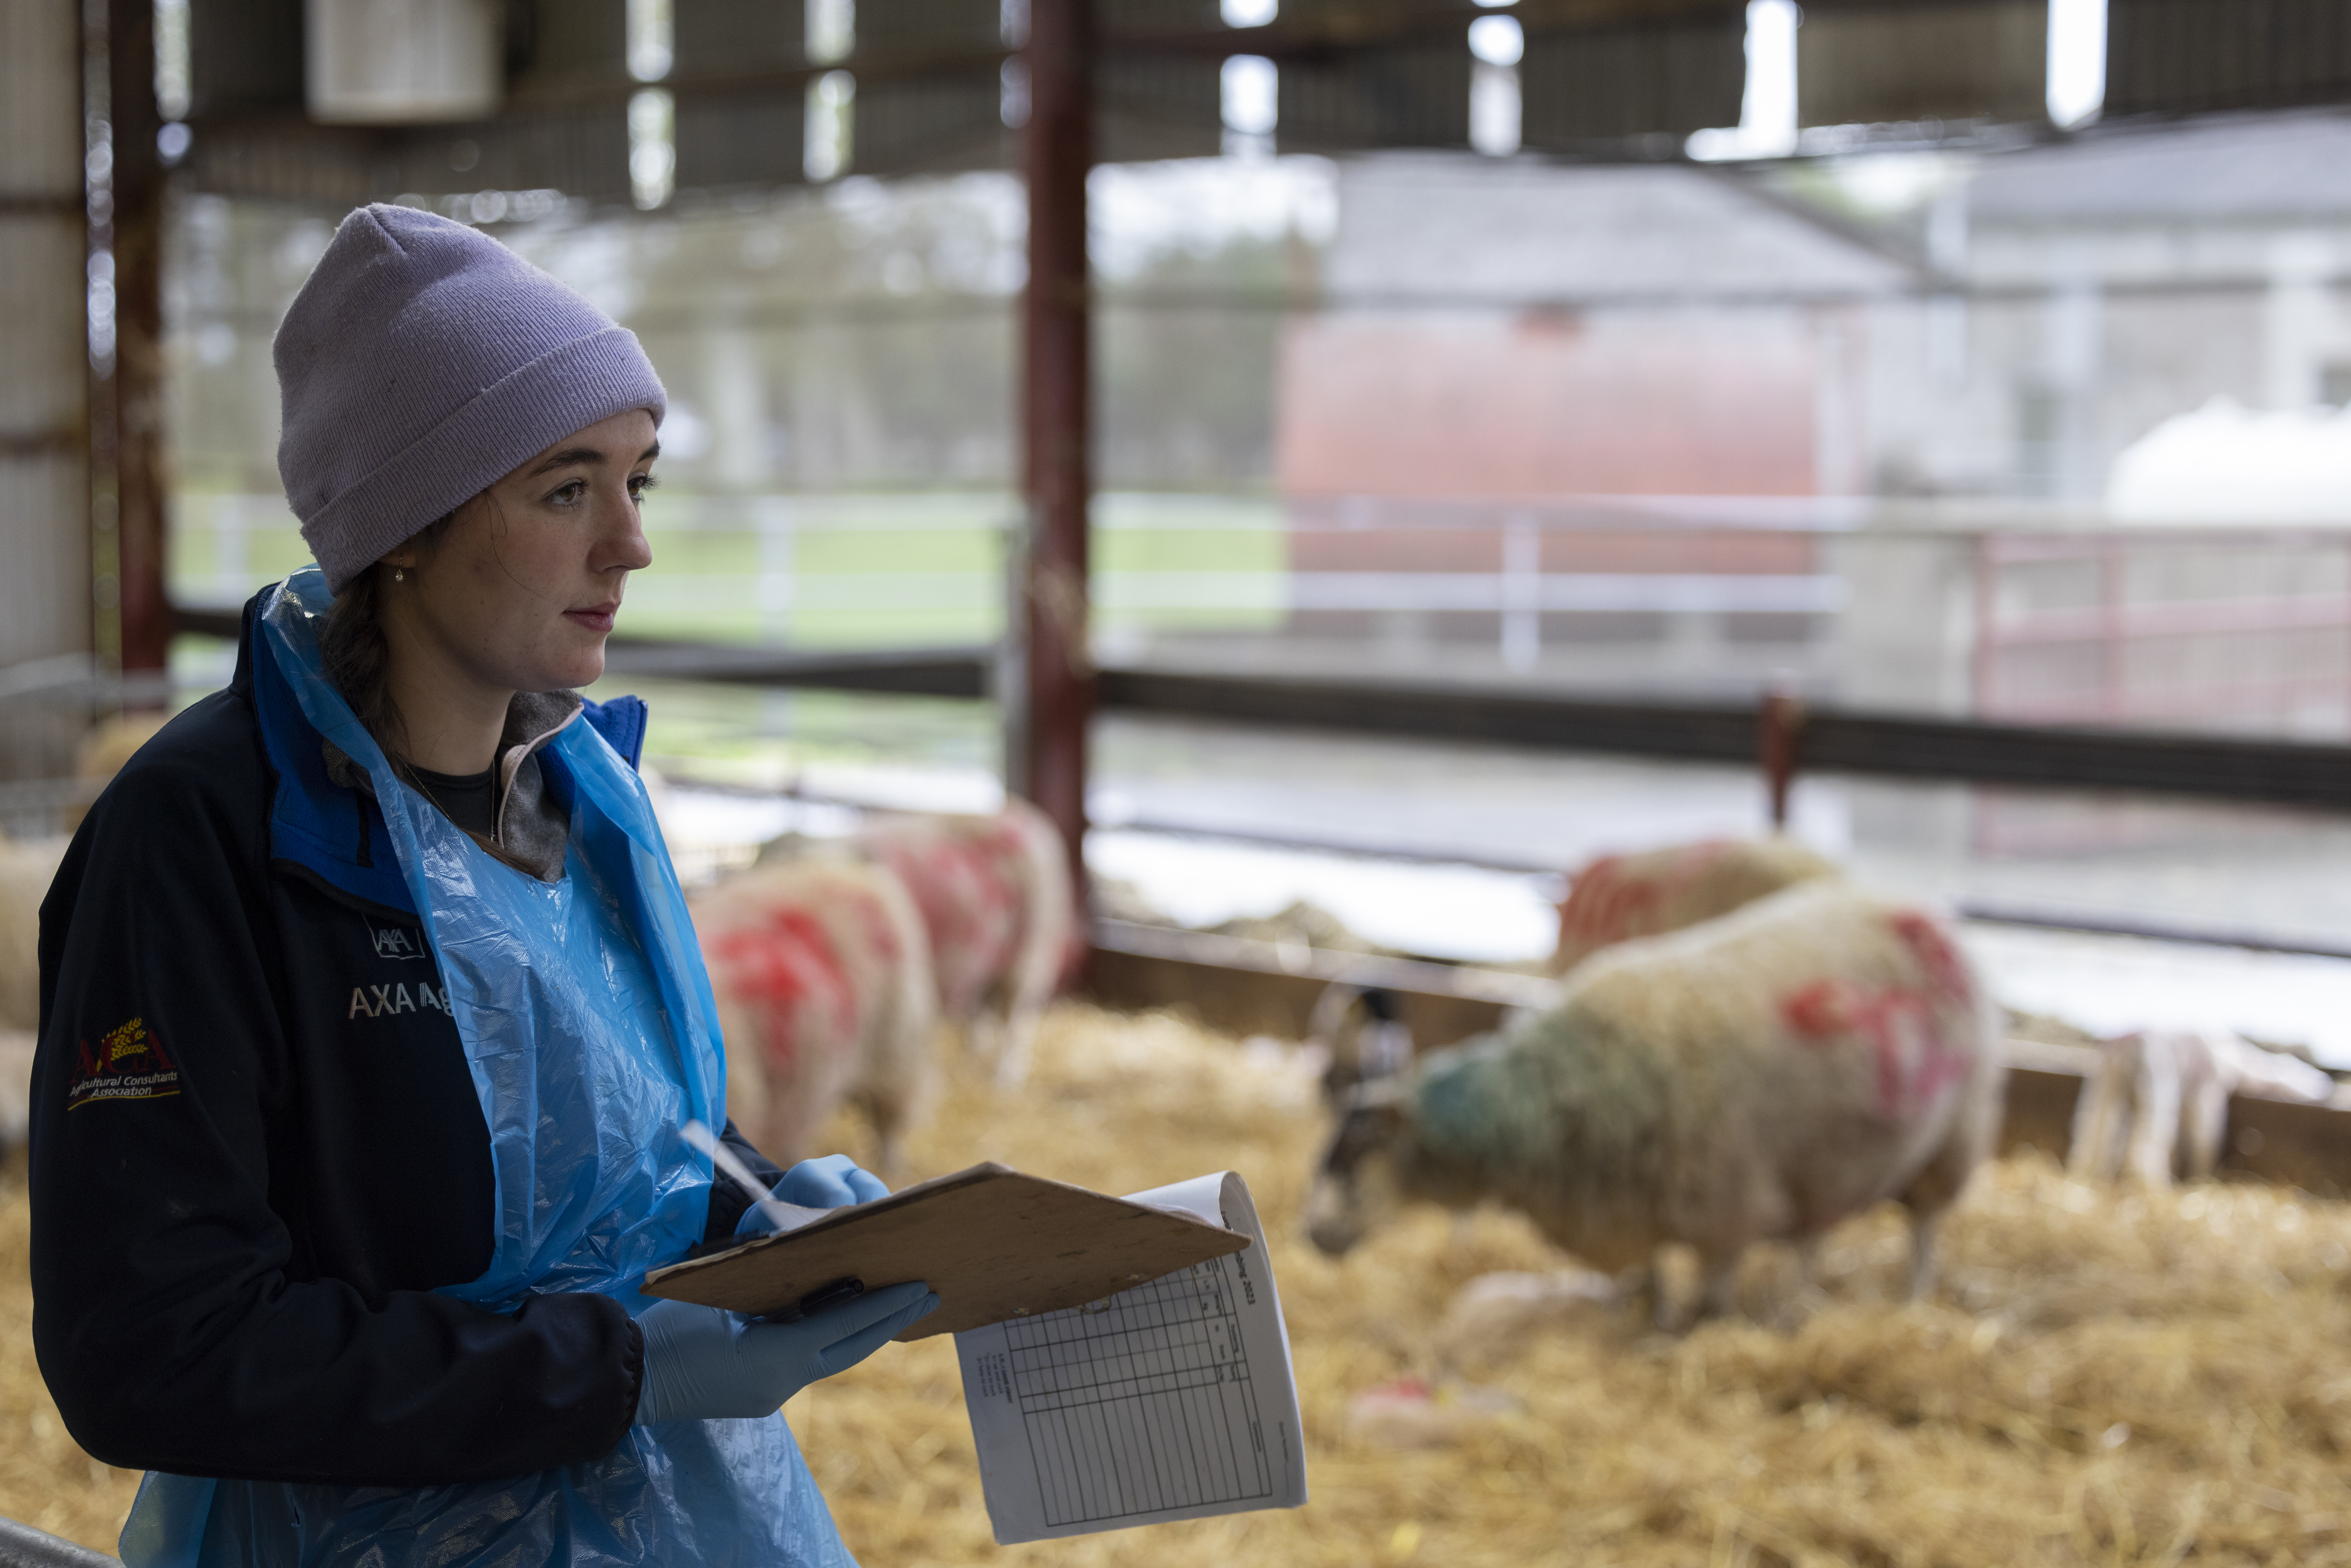 Lyons Farm is a fundamental asset for research in the Schools of Agriculture, Food Science and Veterinary Medicine.